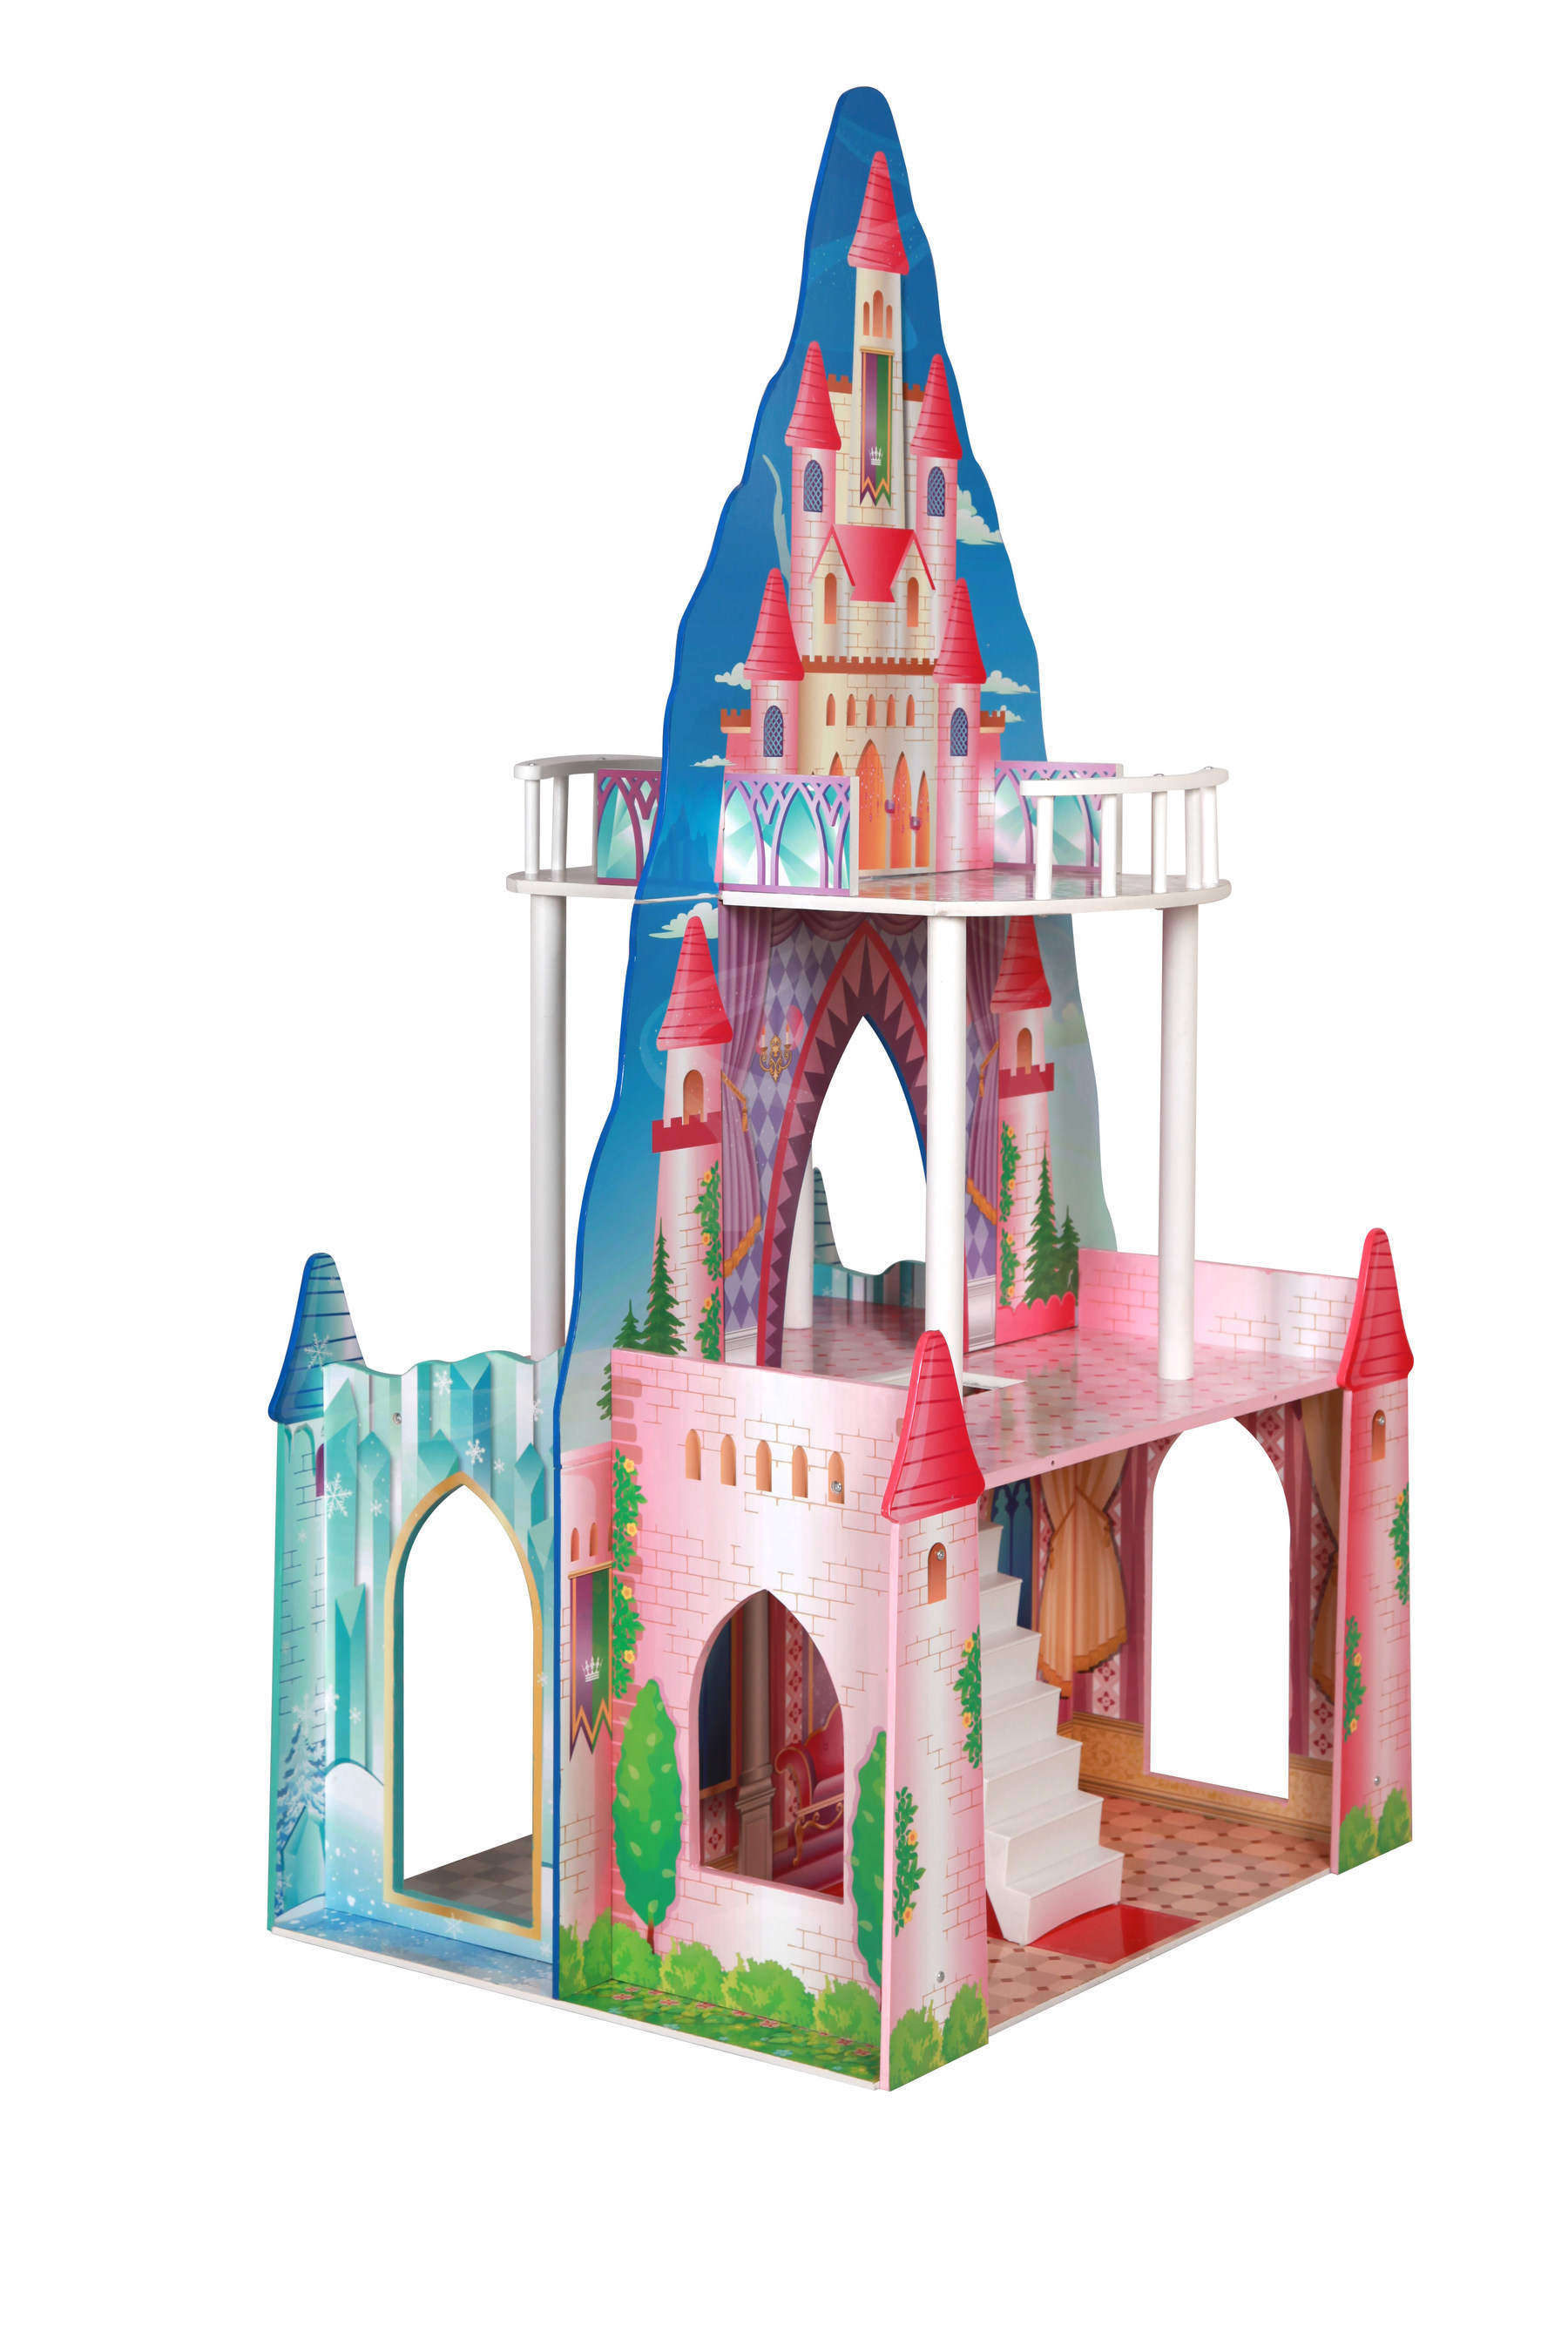 Princess and Ice Castle Dollhouse: A BJ's Exclusive, this imaginative dollhouse is built for hours of fun with three floors of double-sided play and stands almost 4' high. Ages 3 Years+